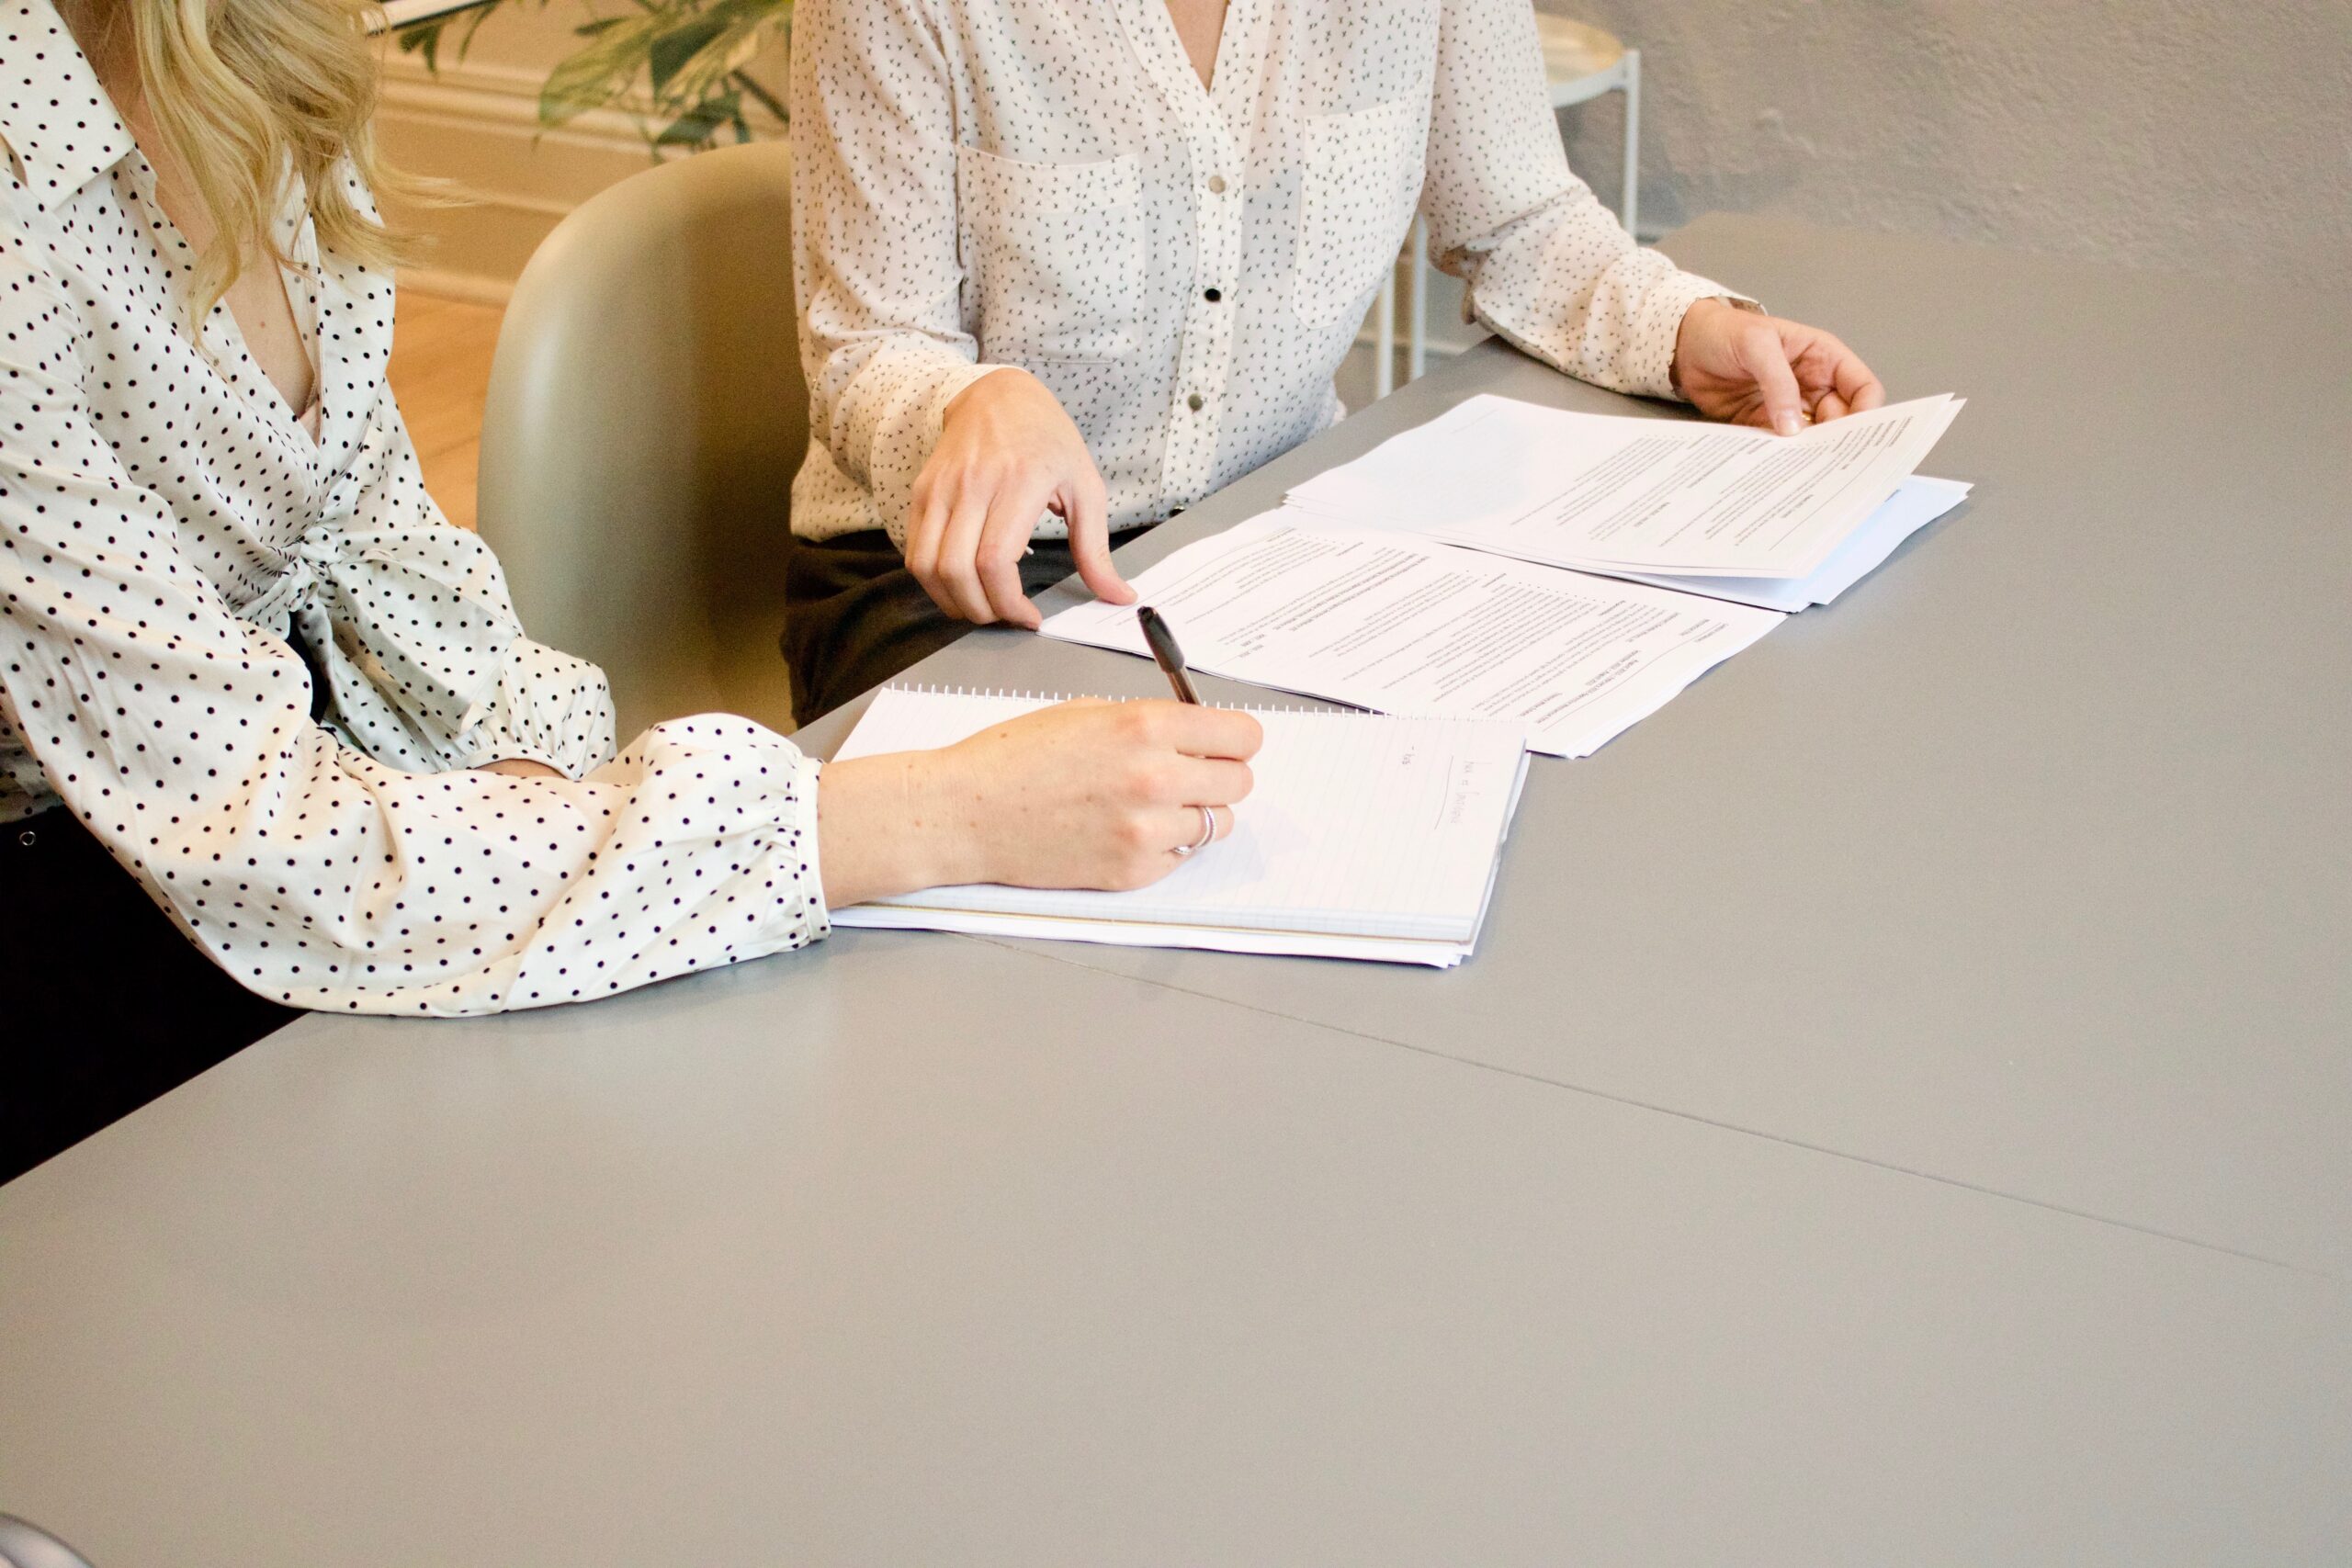 Woman signing documents in front of another woman